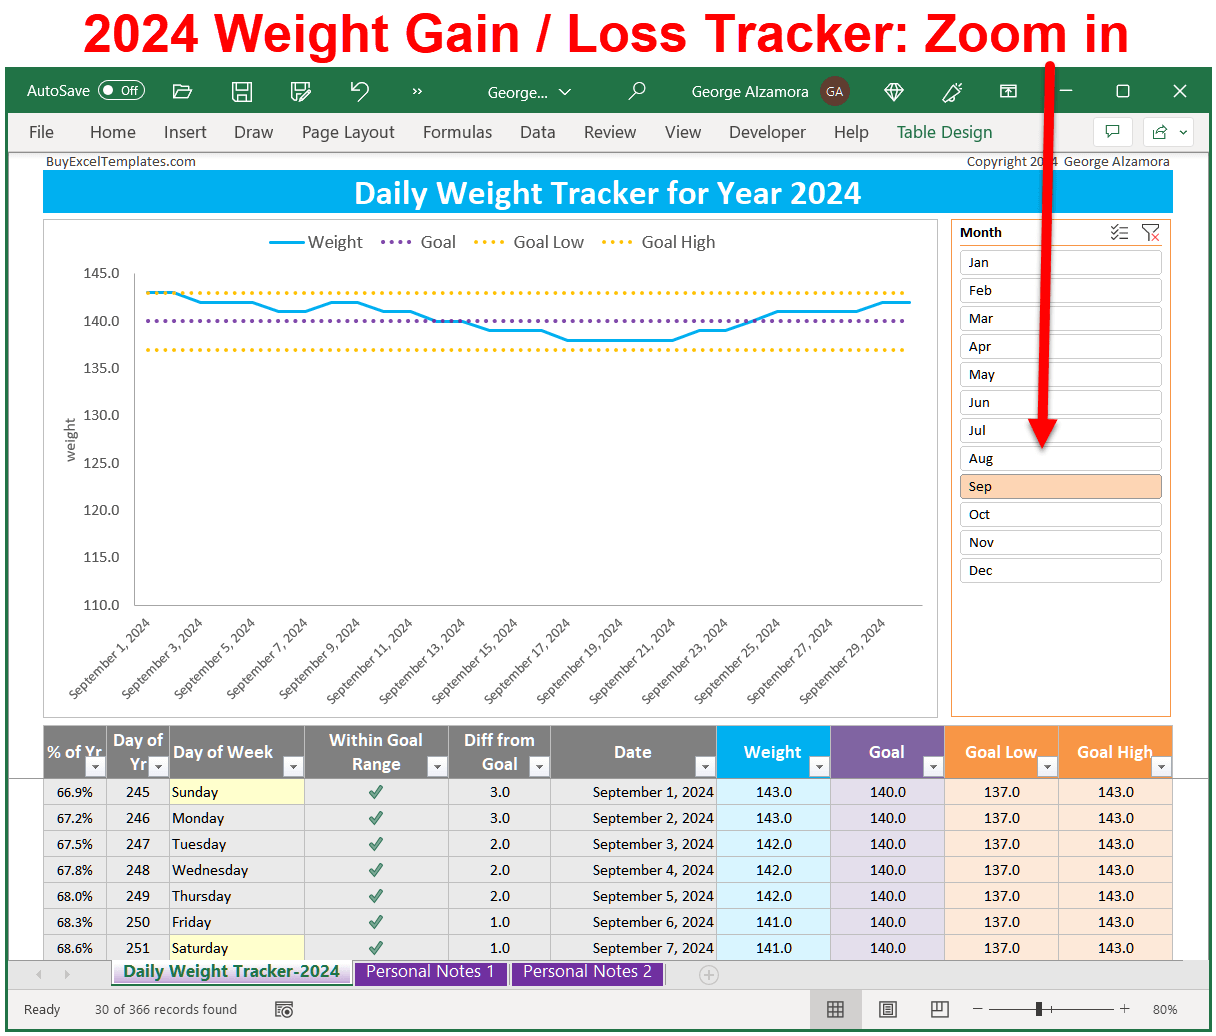 Weight Loss Gain Tracker App For 2024